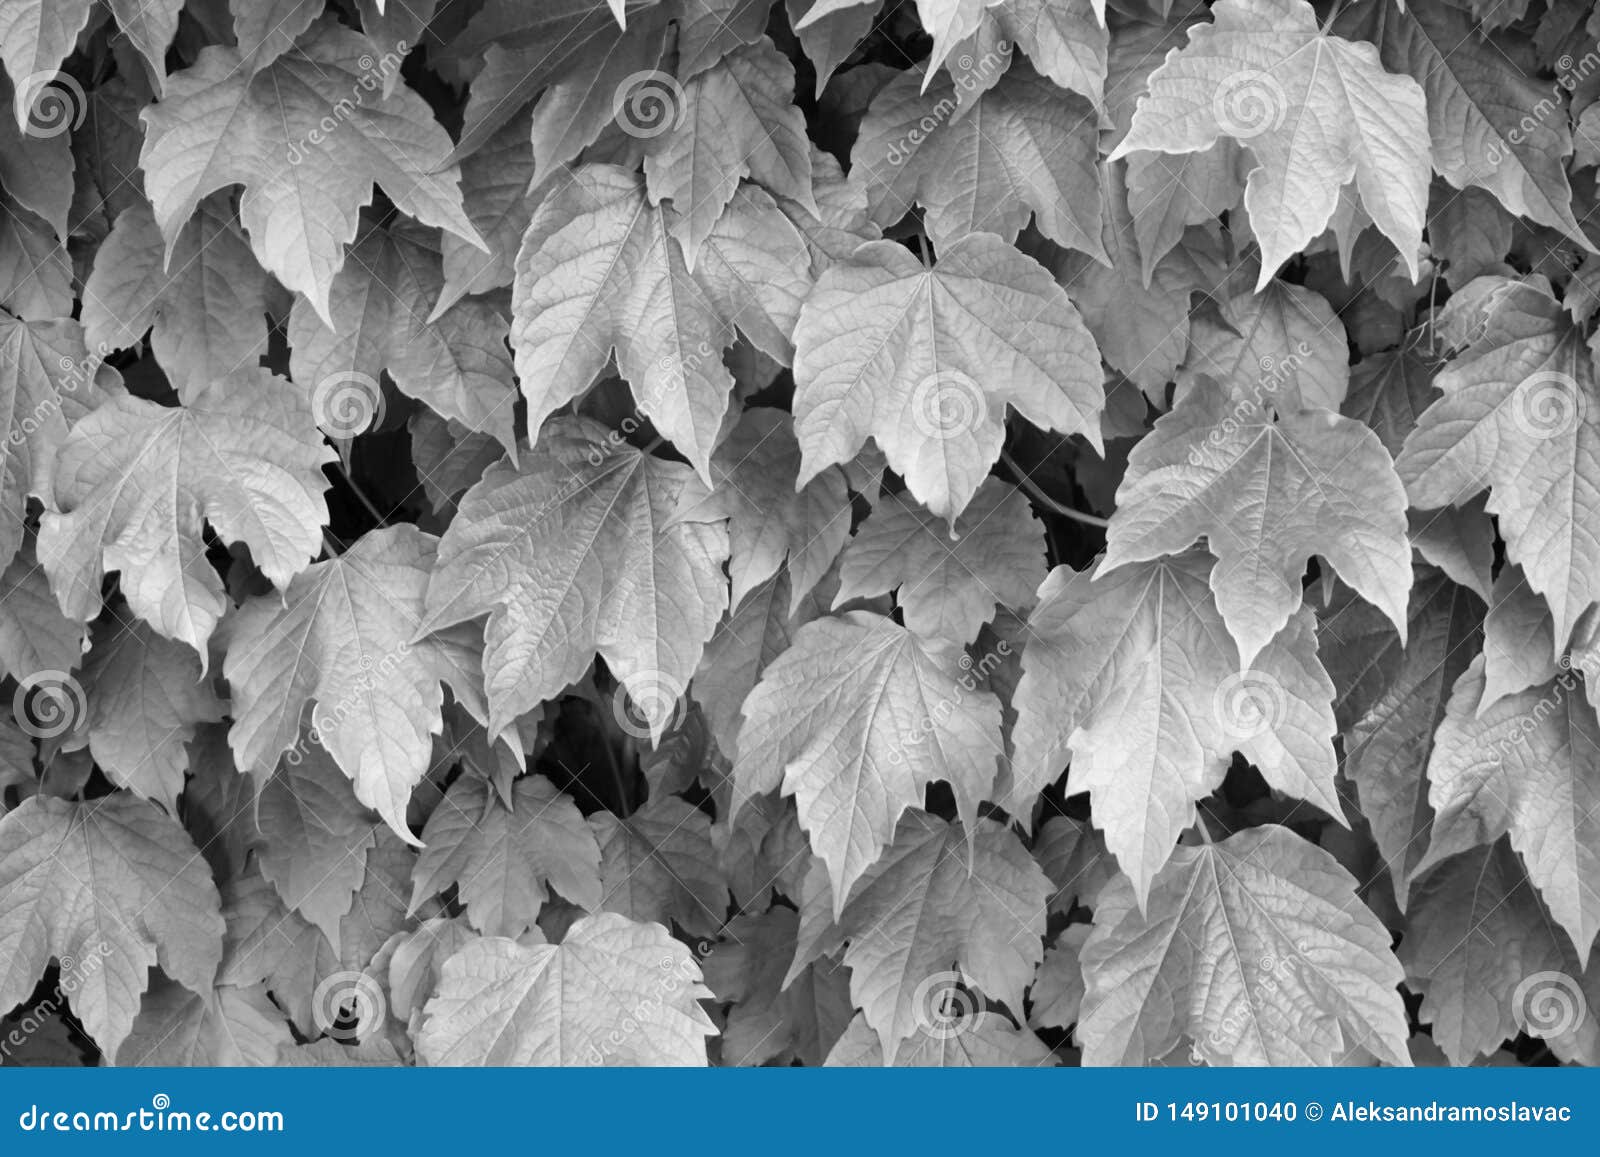 Black and White Background. Abstract Leaves Wall Stock Photo - Image of